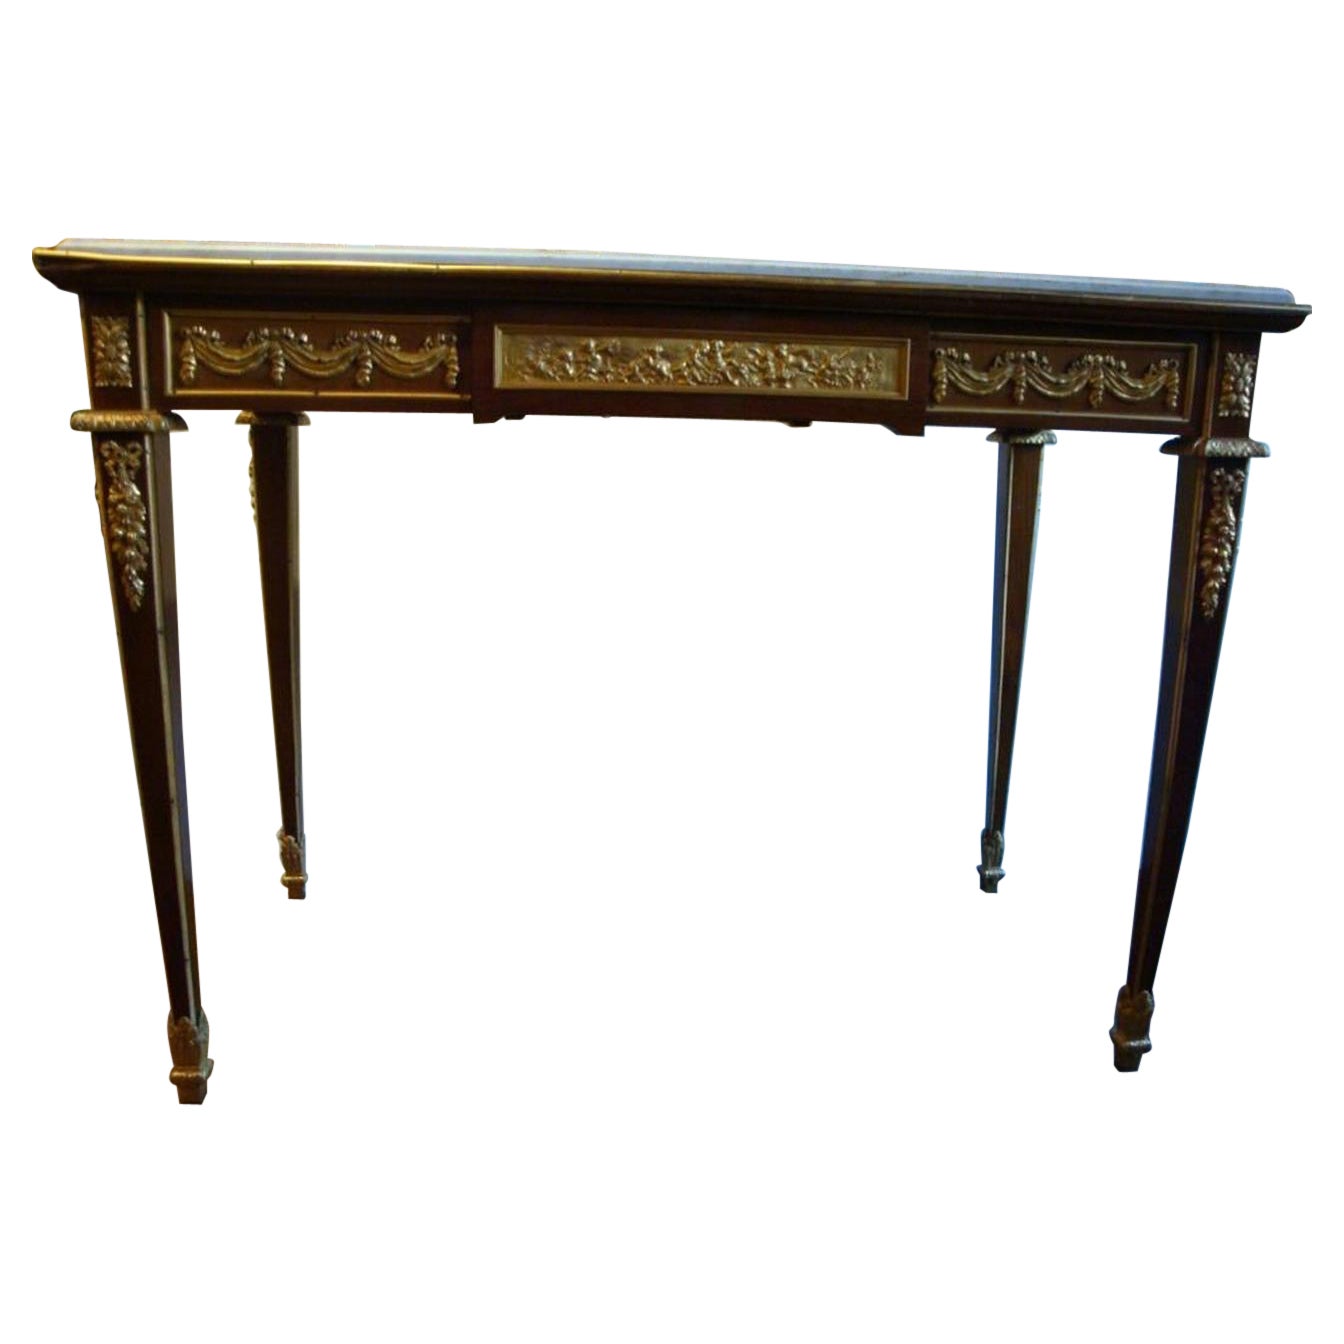  Beautiful Museum Qty 1900s French Ormolu Mounted Mahagony Center Marble Table For Sale